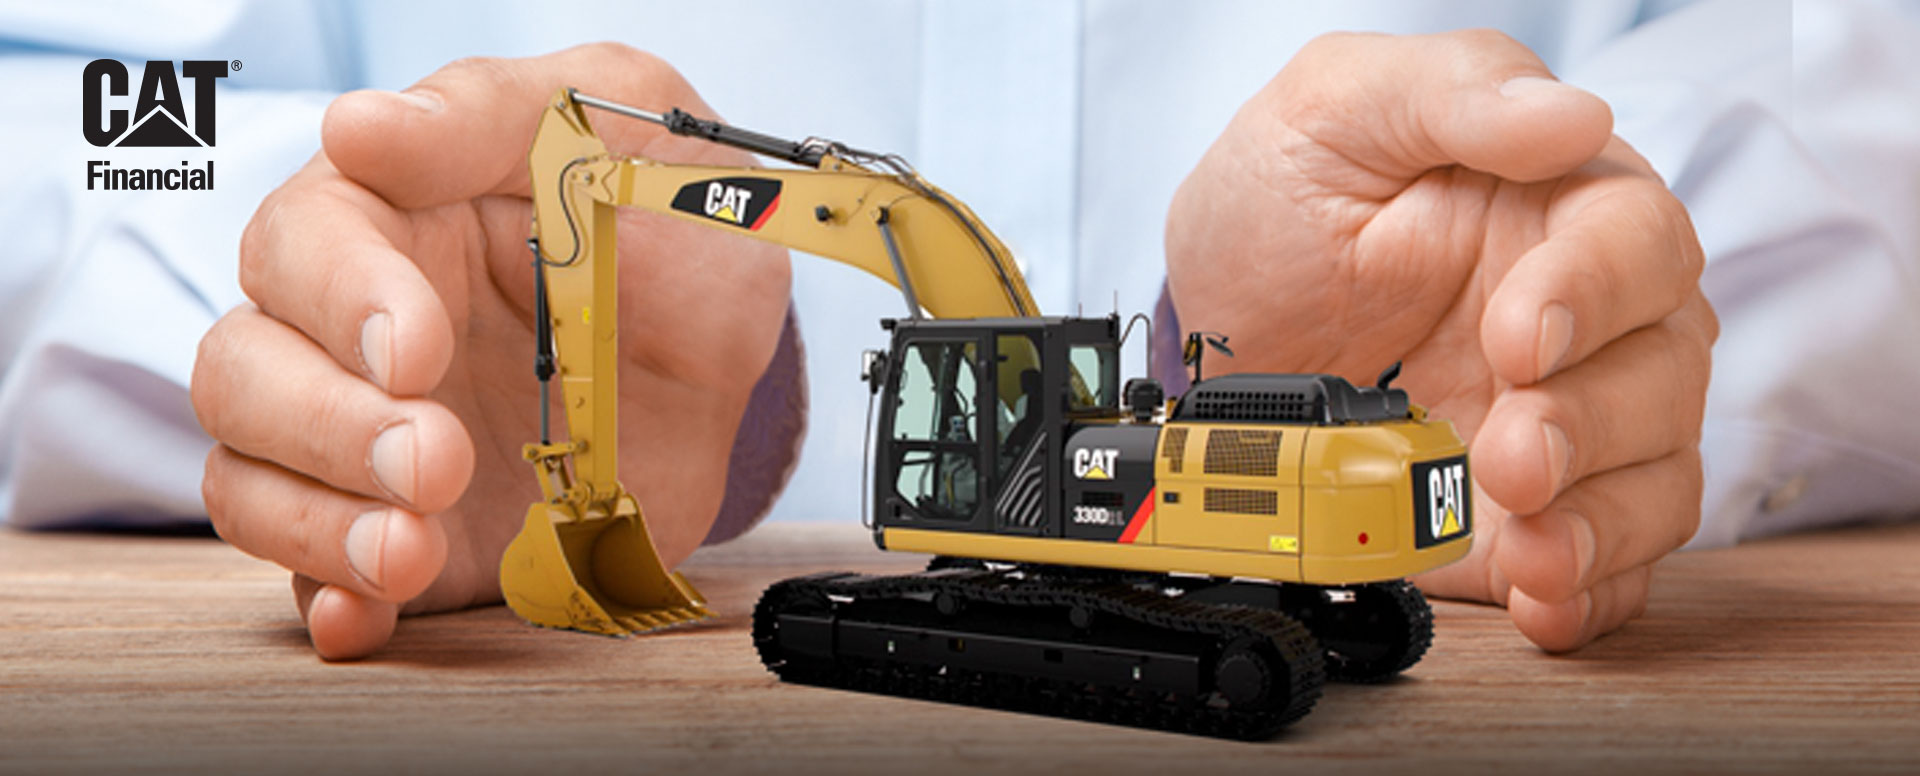 Cat financial, making ownership of Cat equipment affordable.